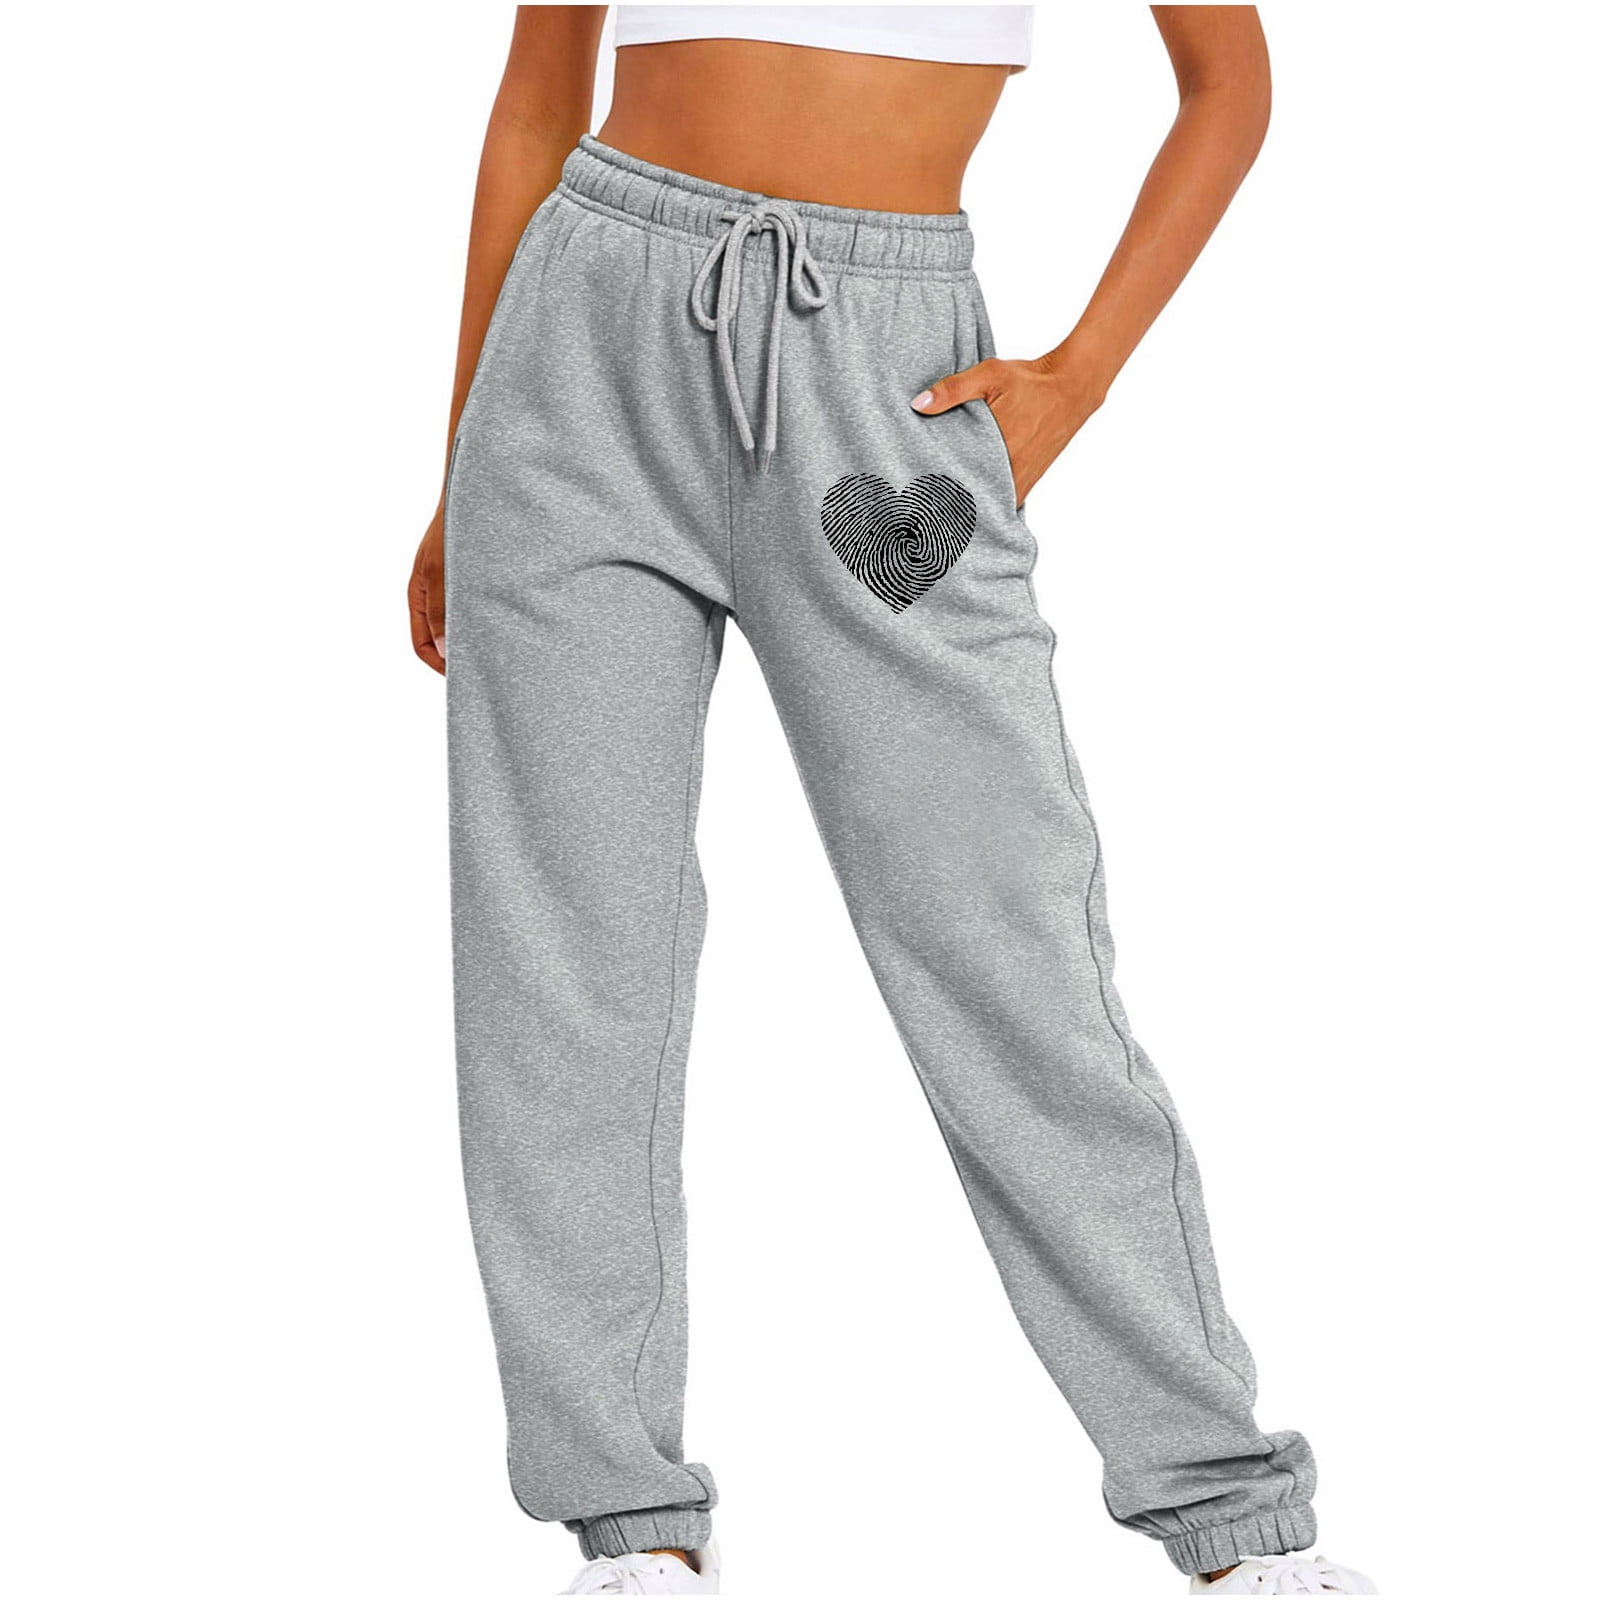 Womens Comfy Cinched Bottom Sweatpants with Pockets Elastic High